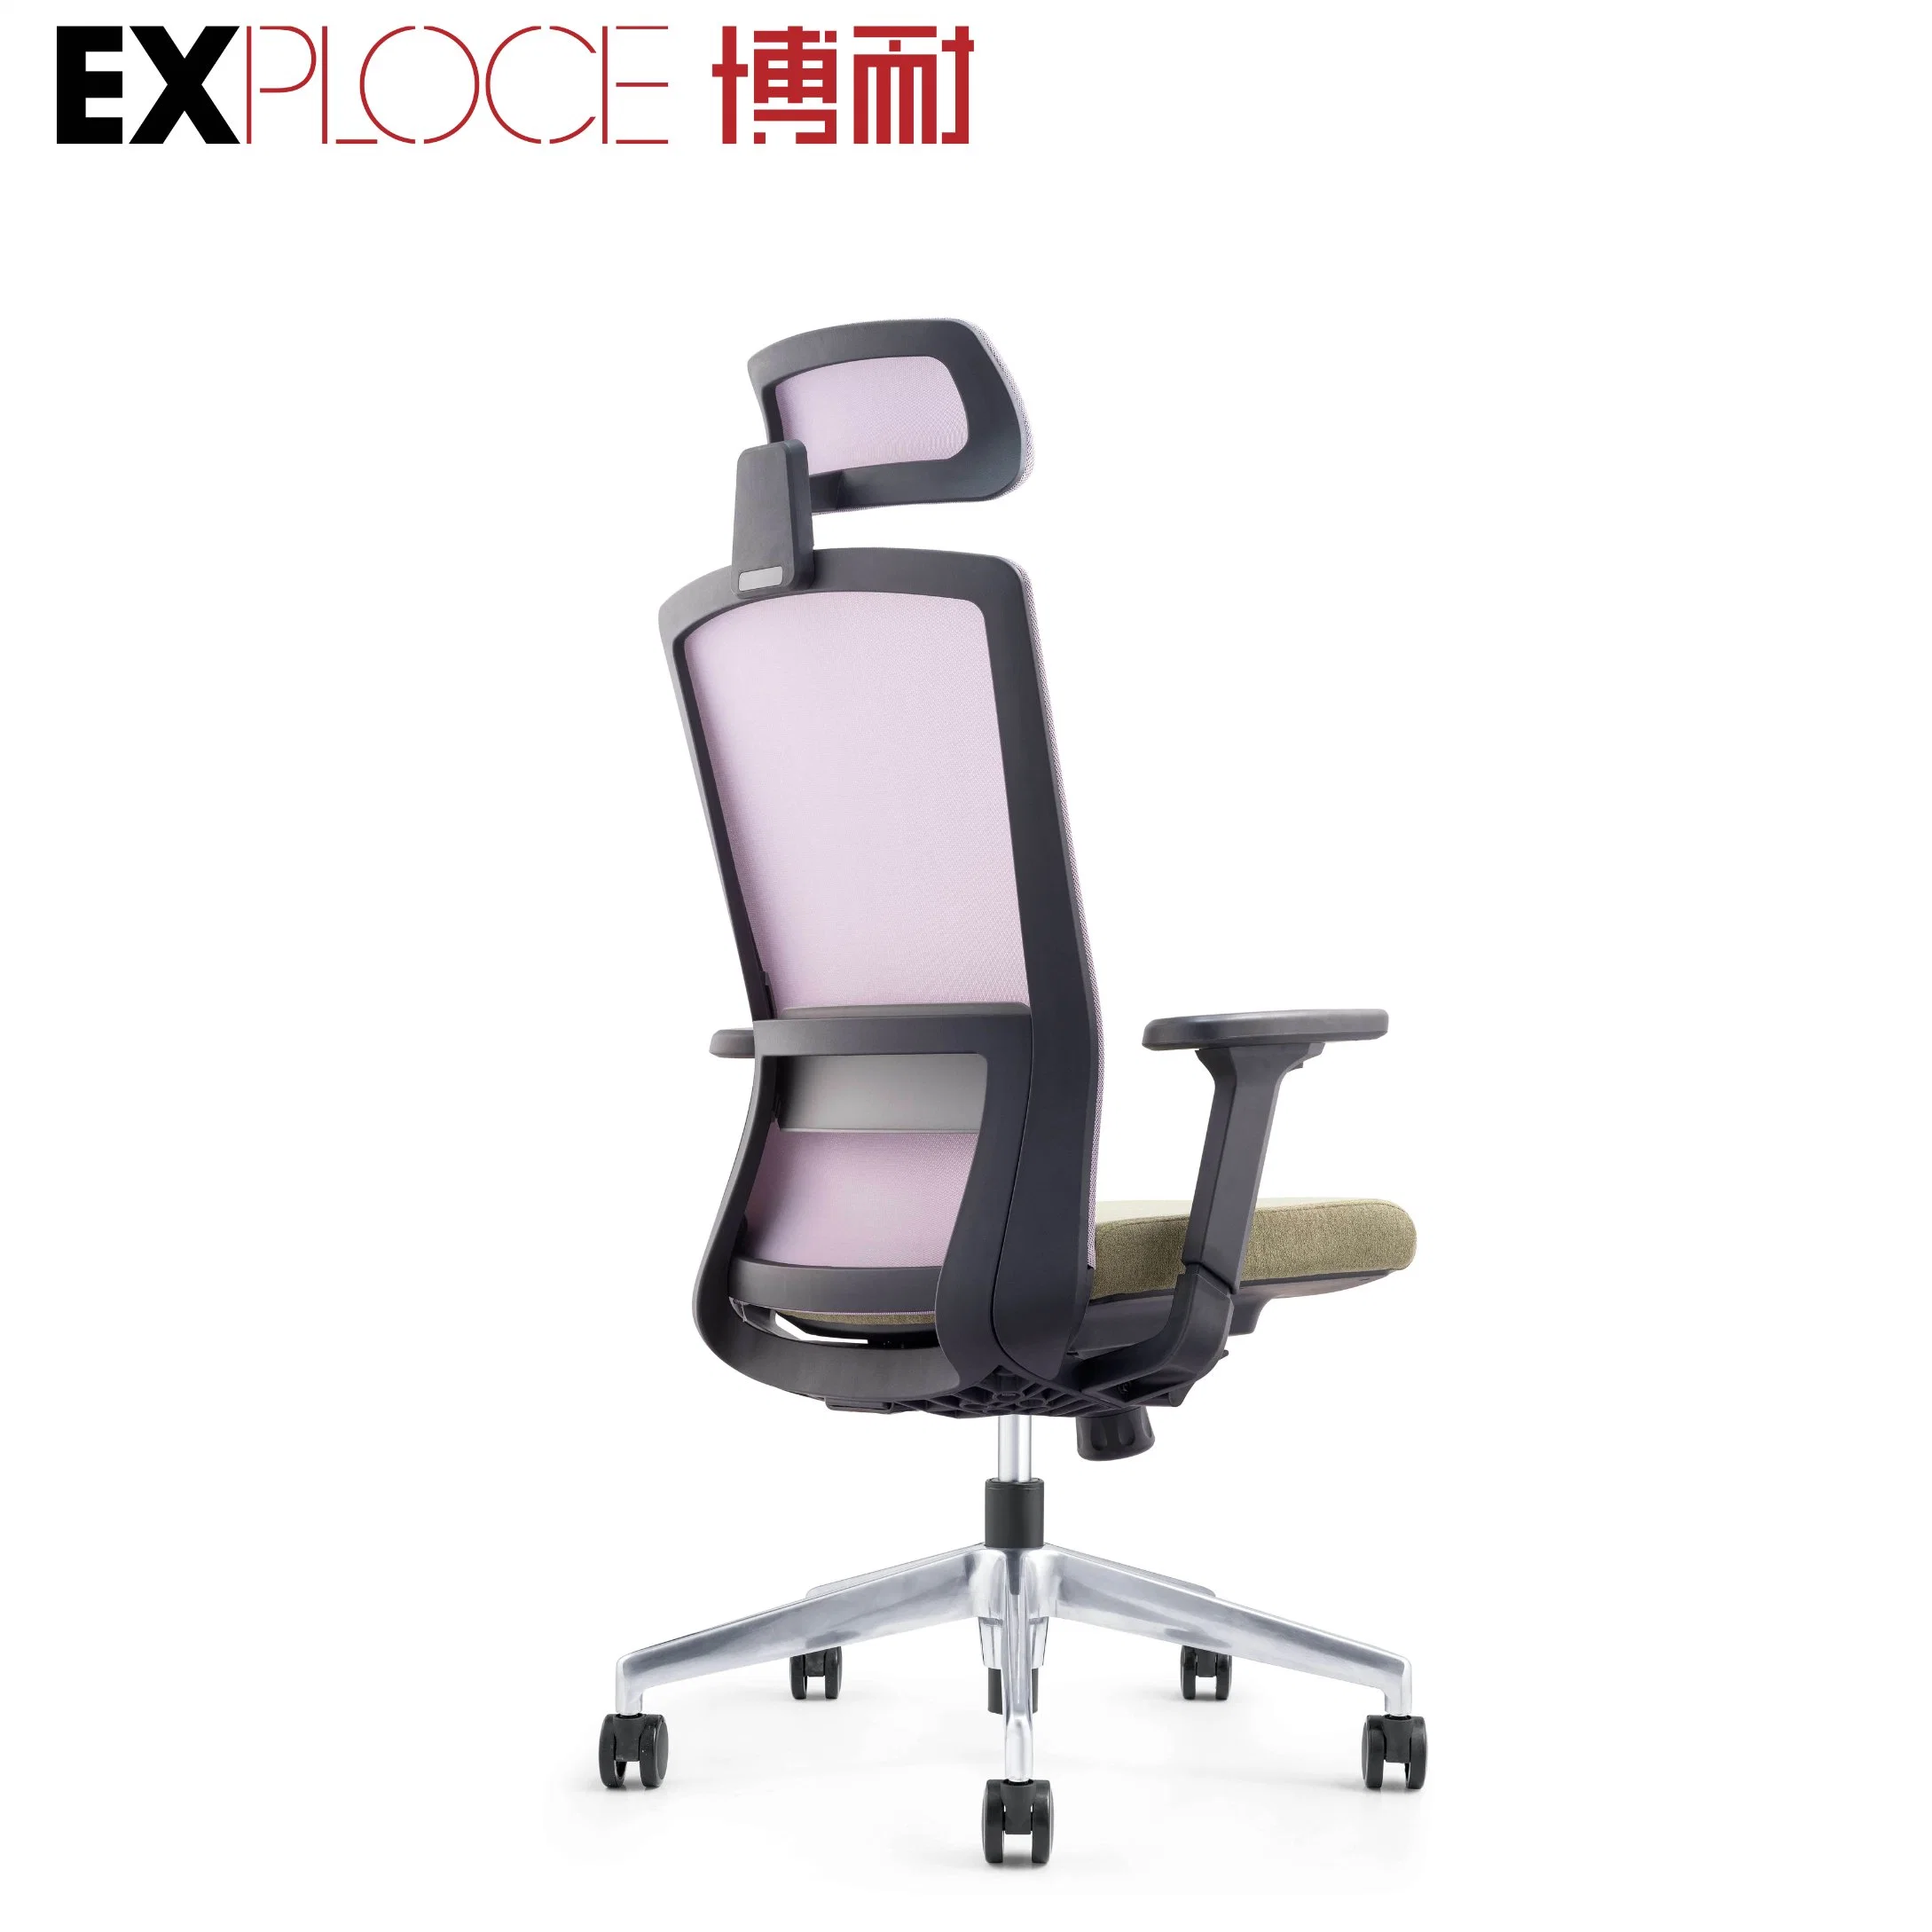 Best Price Design Full Mesh High Back Executive Office Passed BIFMA Standard Executive Office Chair